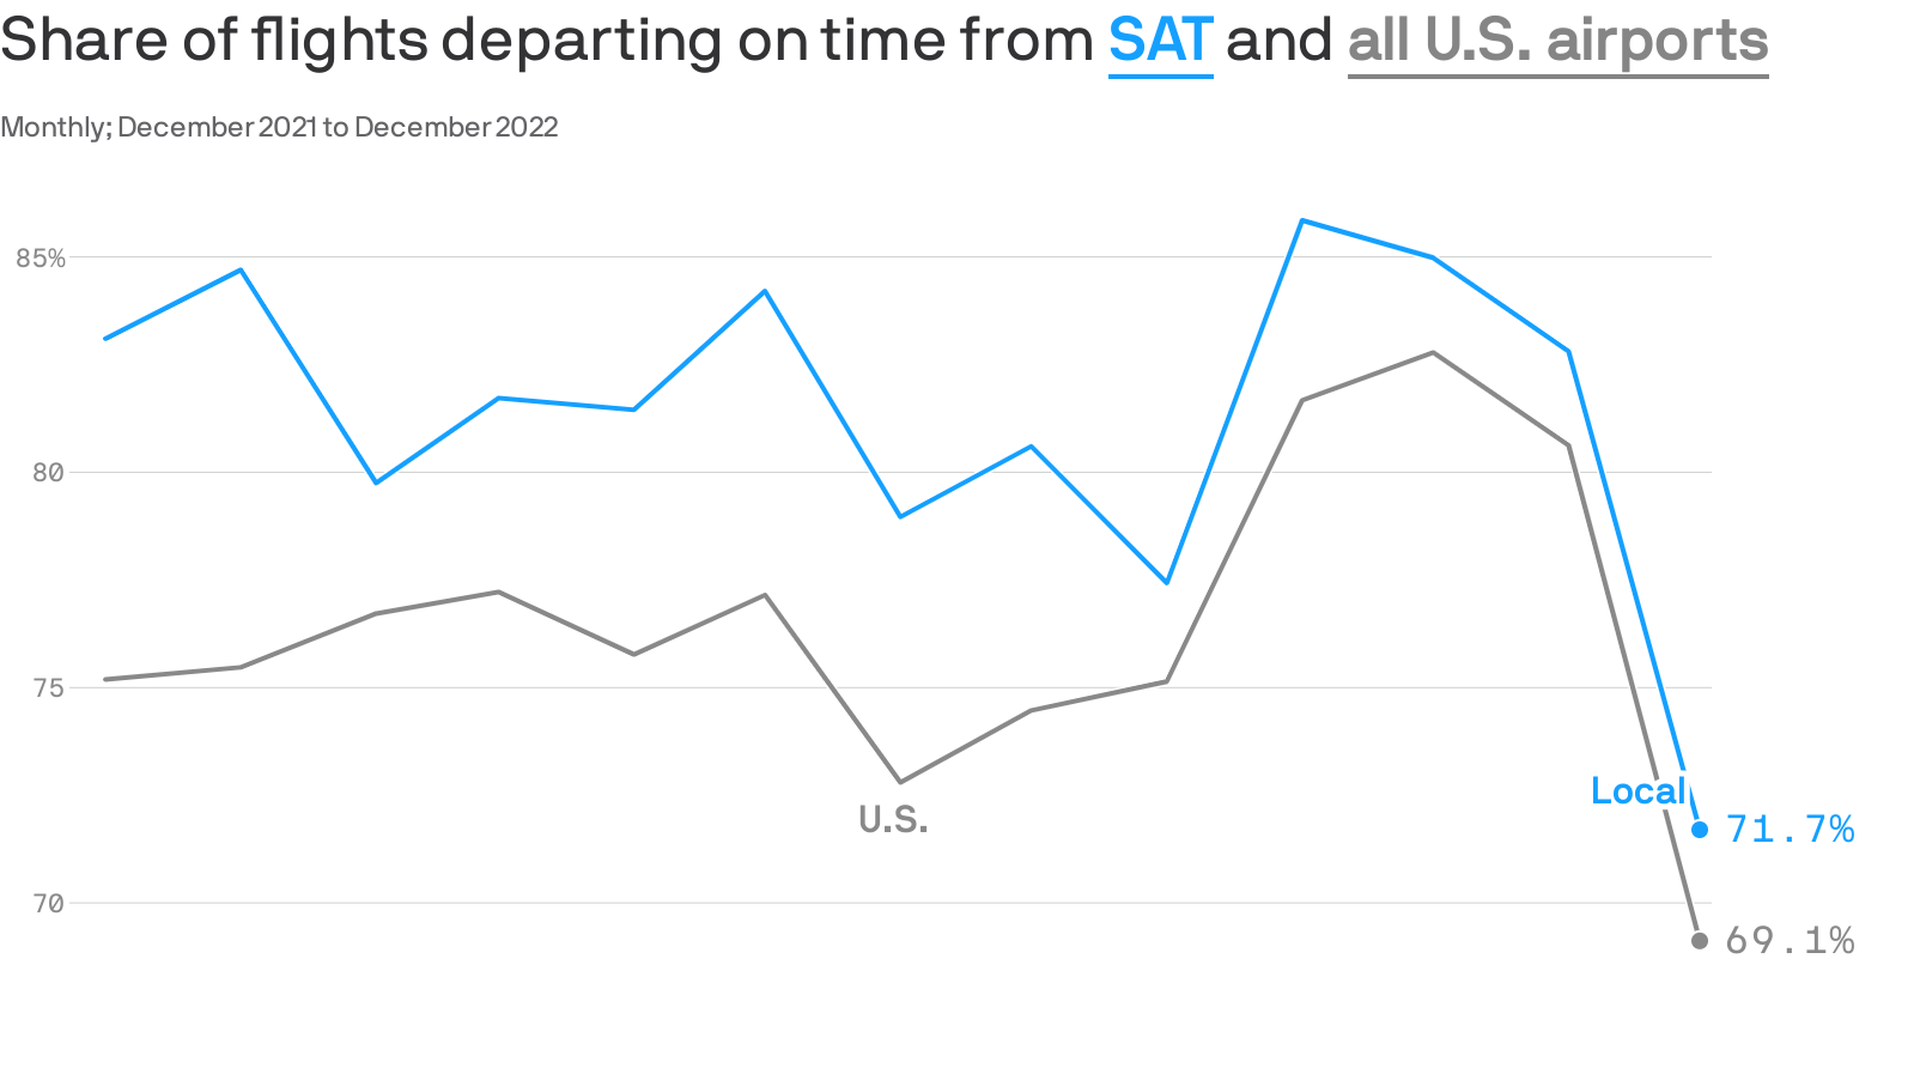 A chart showing the share of flights departing on time from SAT and all U.S. airports in December 2022, when Southwest Airlines delays hit hard.